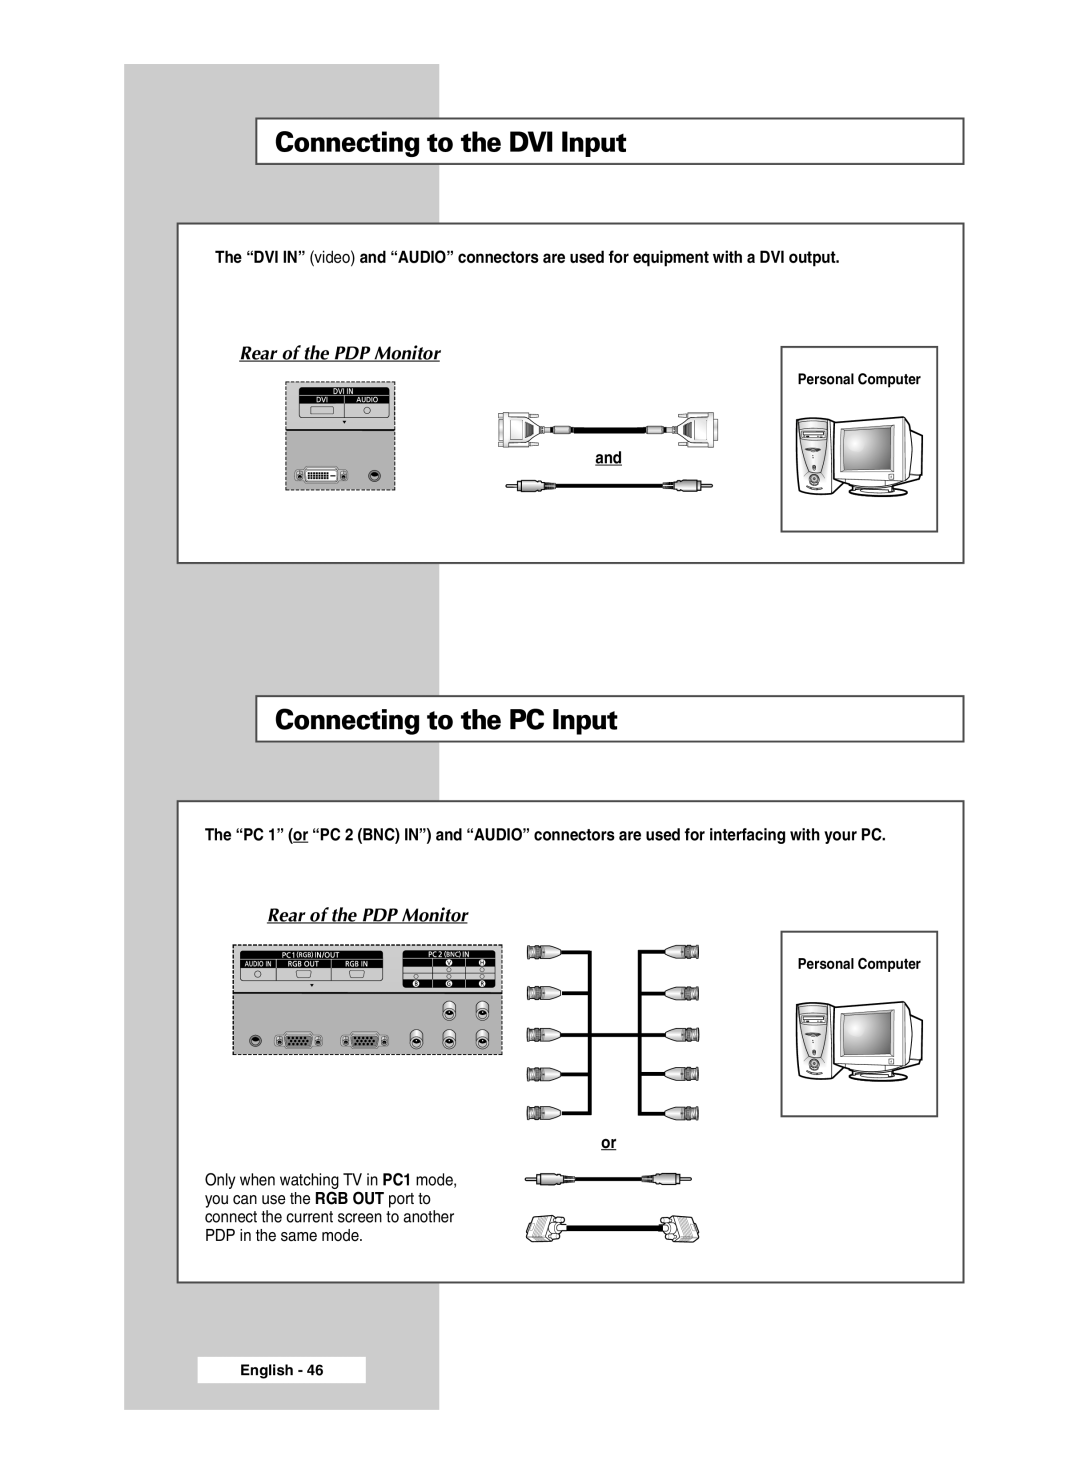 Samsung PPM50M5HSX/EDC manual Connecting to the DVI Input, Connecting to the PC Input, Rear of the PDP Monitor, English 